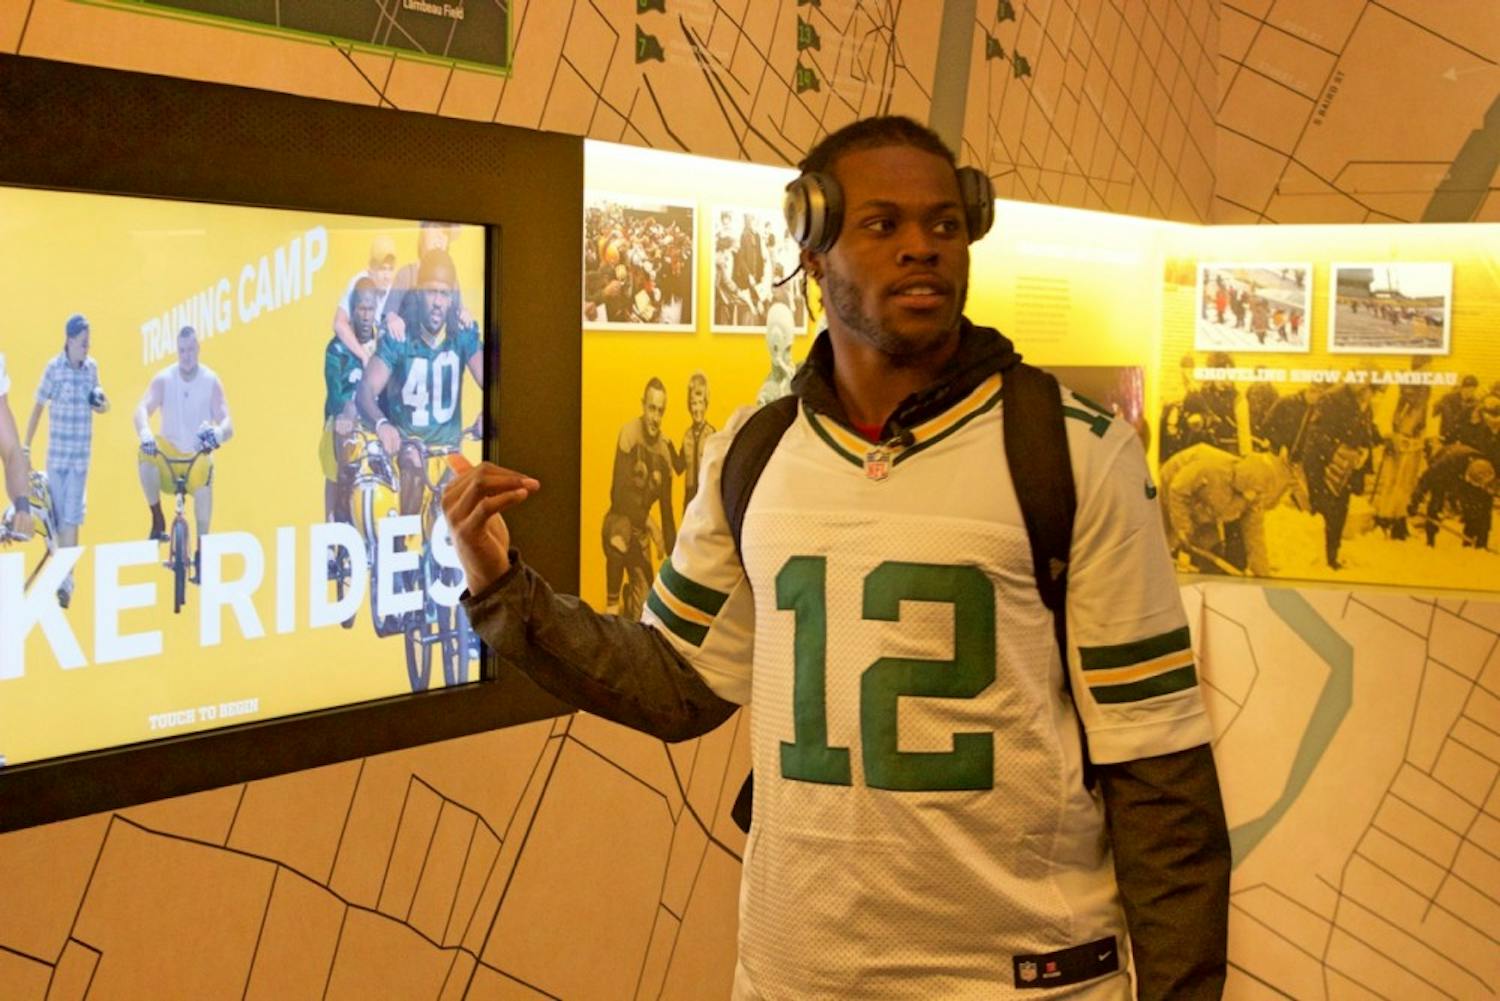 Gallery: Wisconsin visits Green Bay Packers Hall of Fame